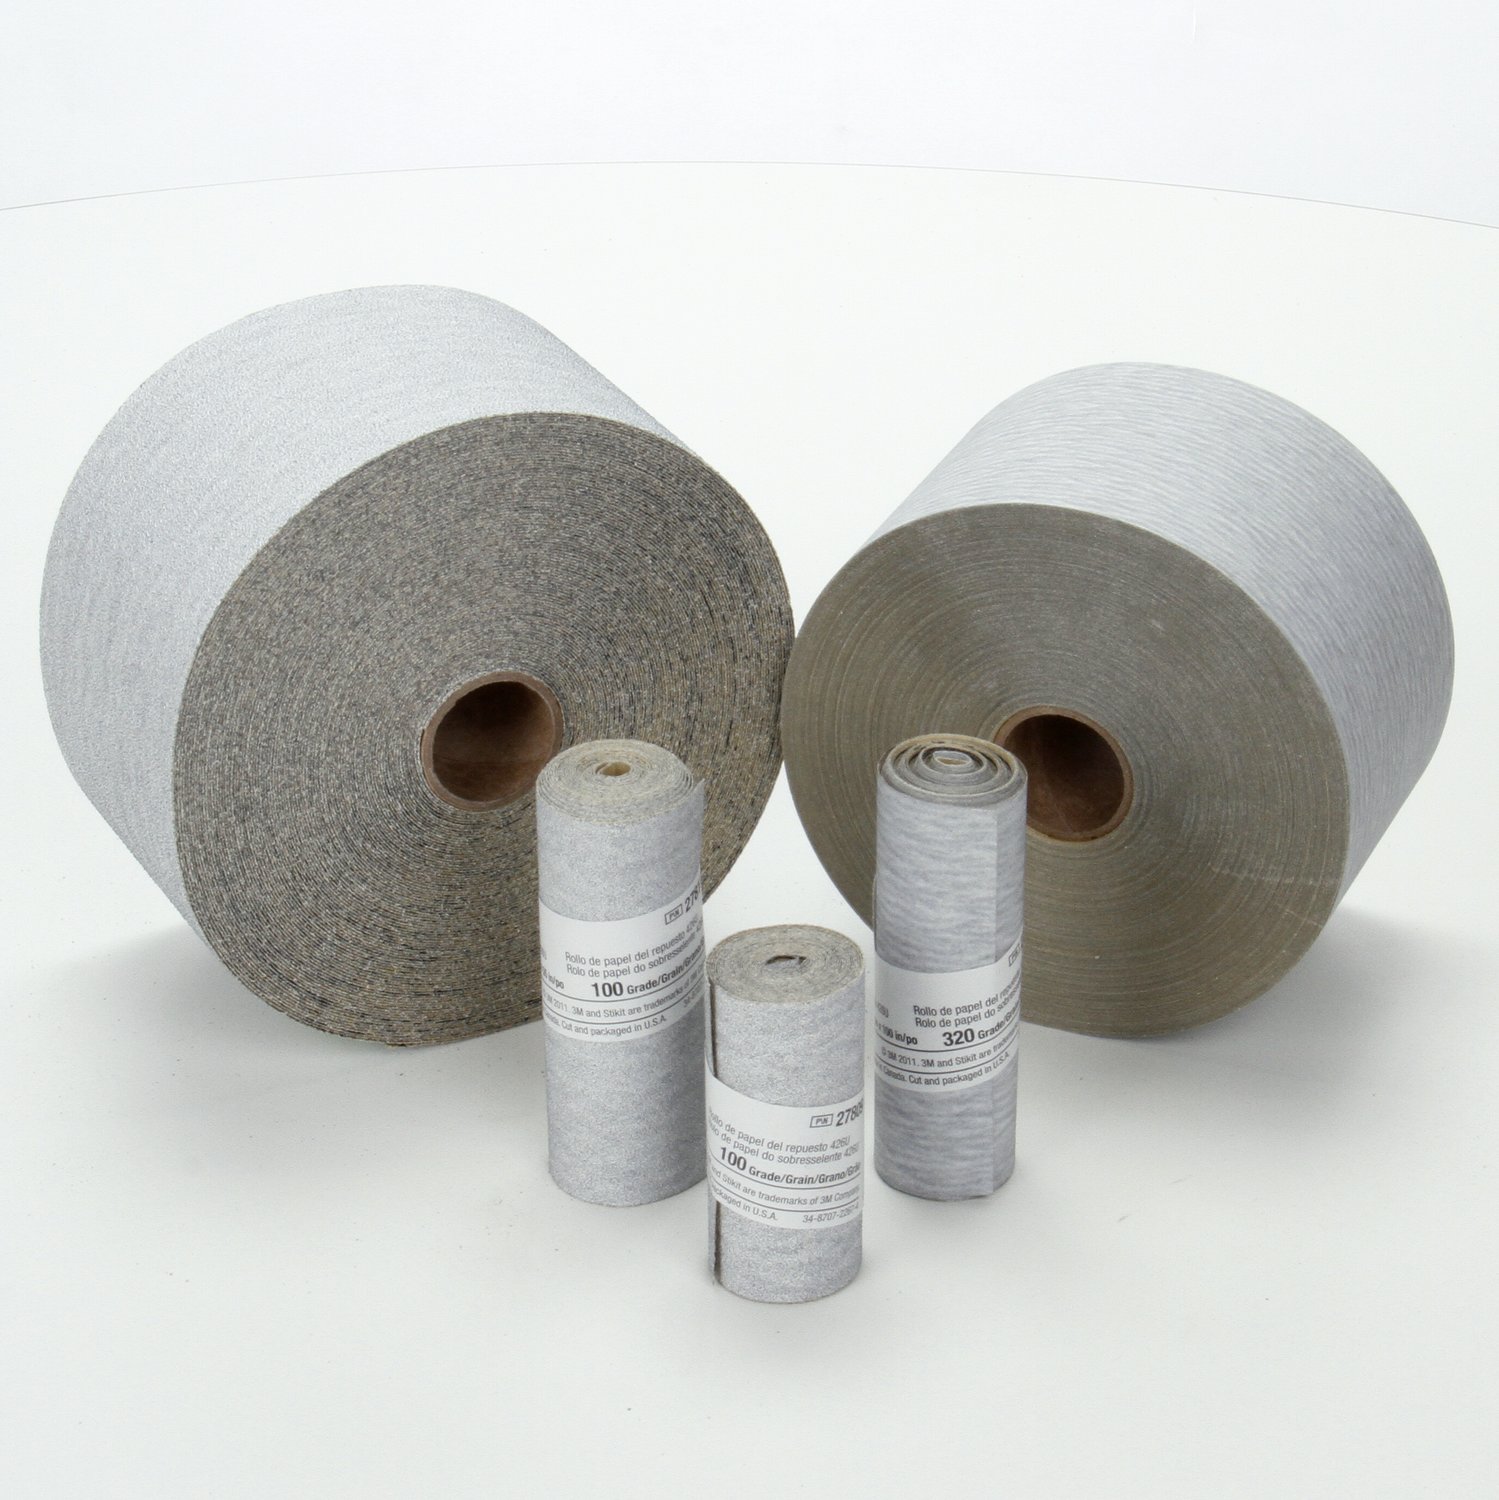 7100070176 - 3M Stikit Paper Roll 426U, 80 A-weight, Config